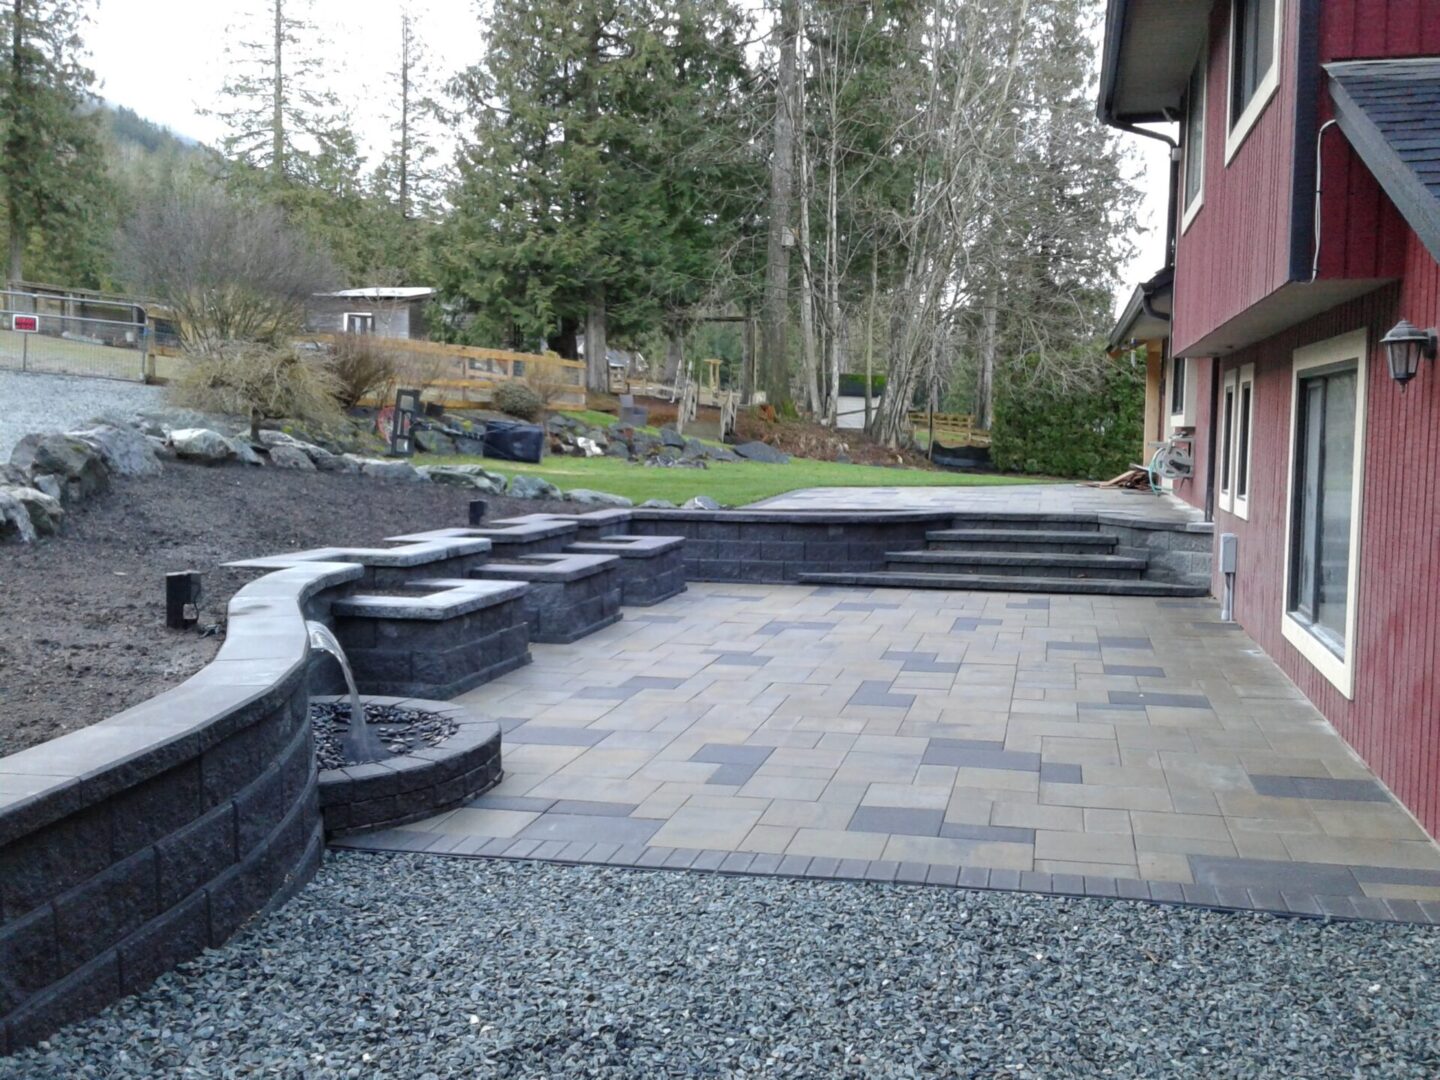 A well-manicured outdoor area featuring a stone patio with step stones, curved retaining walls, and landscaped lawn next to a red-sided house.